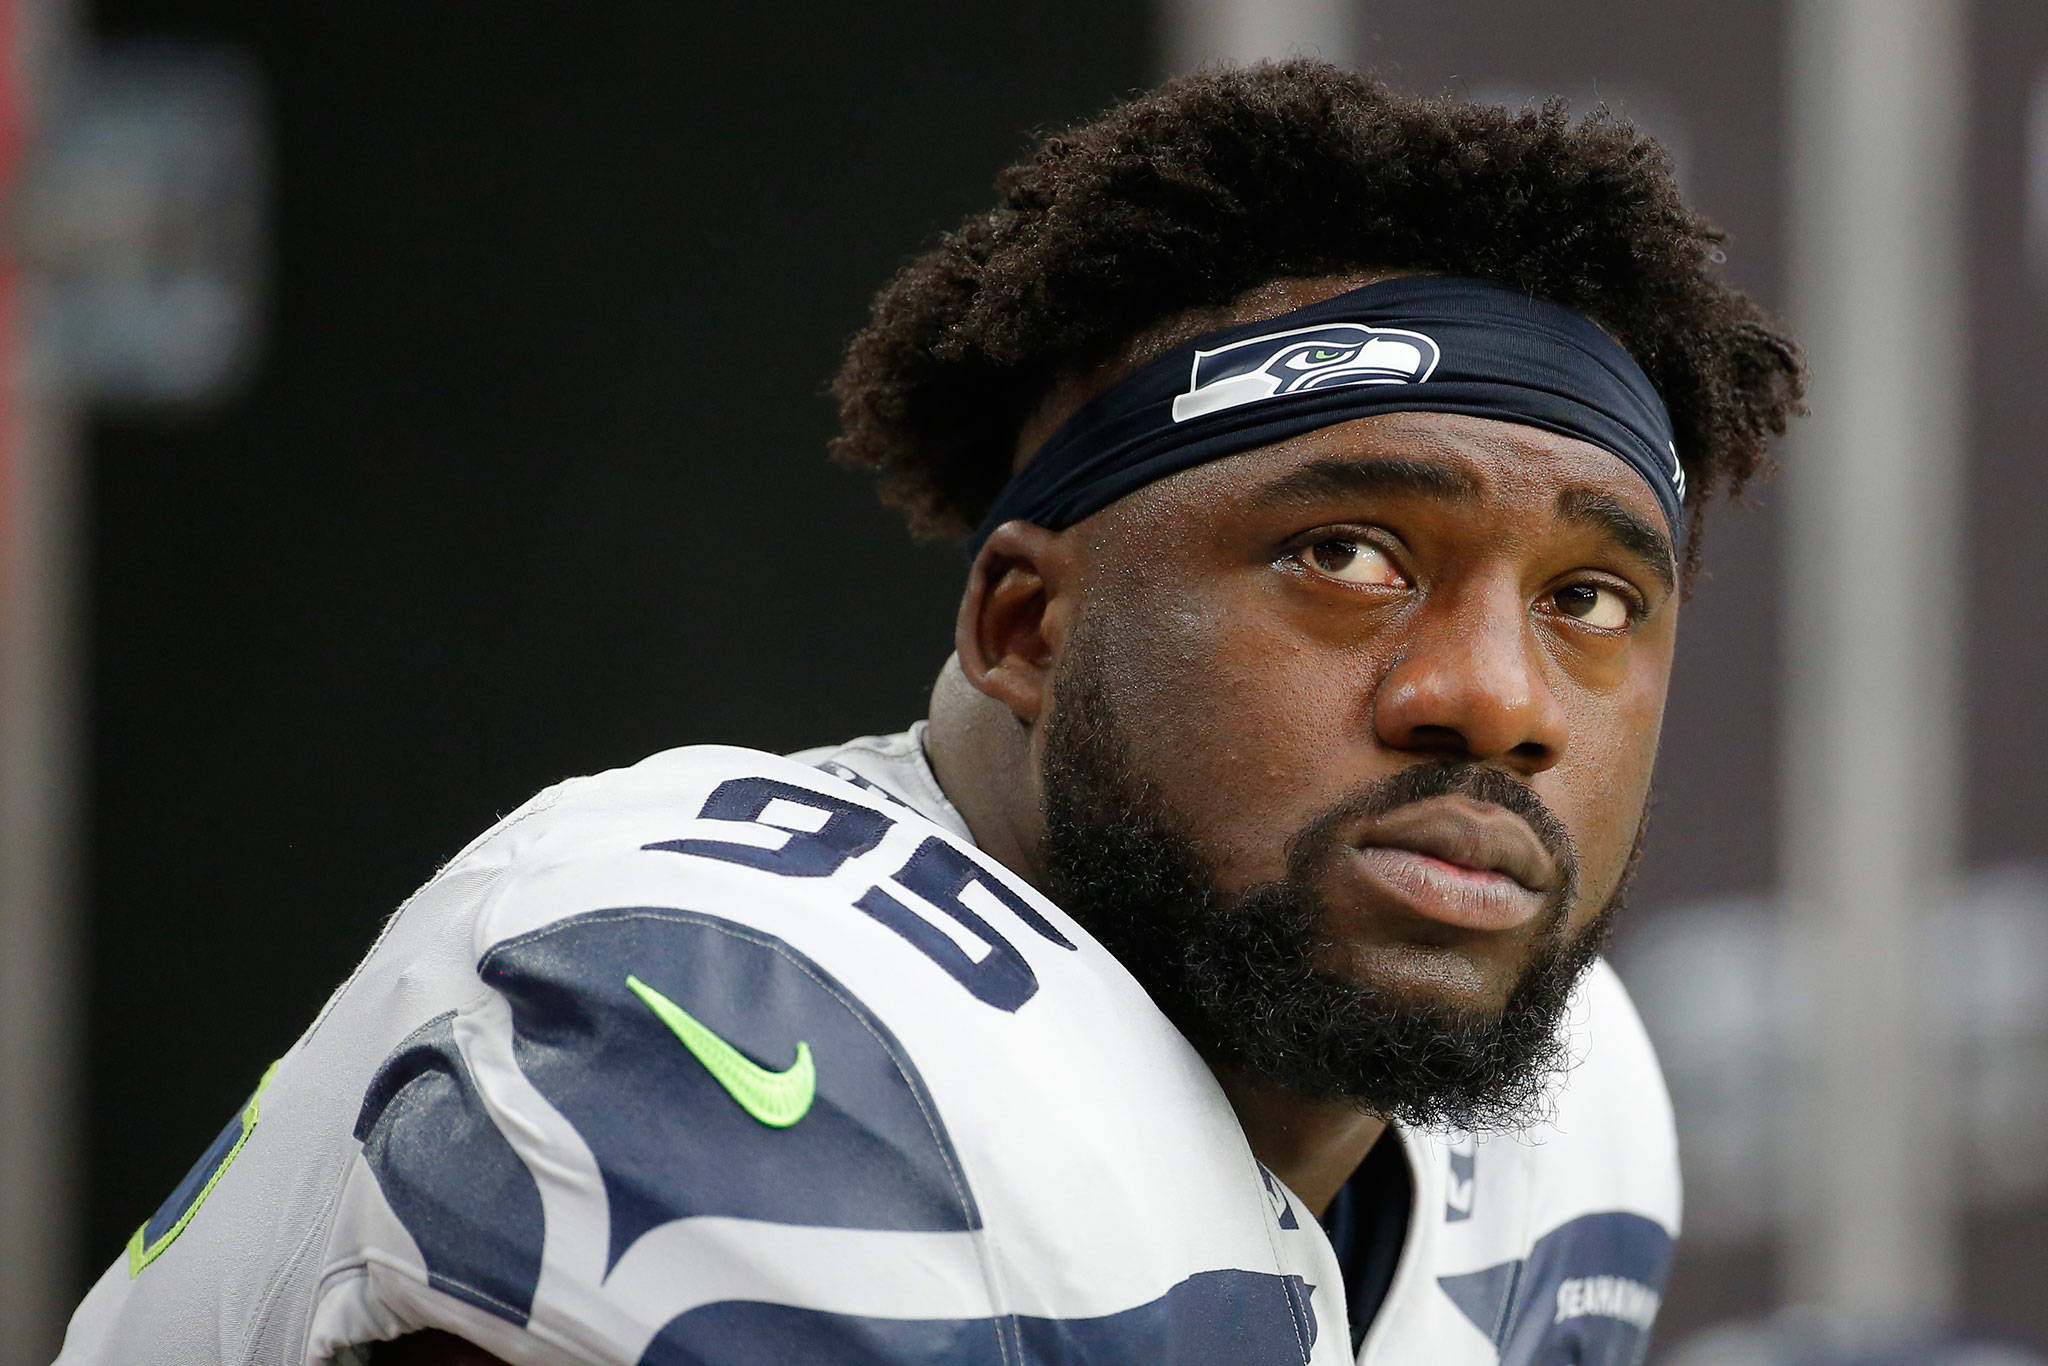 Defensive end L.J. Collier, a 2019 first-round pick, played just 152 snaps and made three tackles during his first season with the Seahawks. (AP Photo/Rick Scuteri)